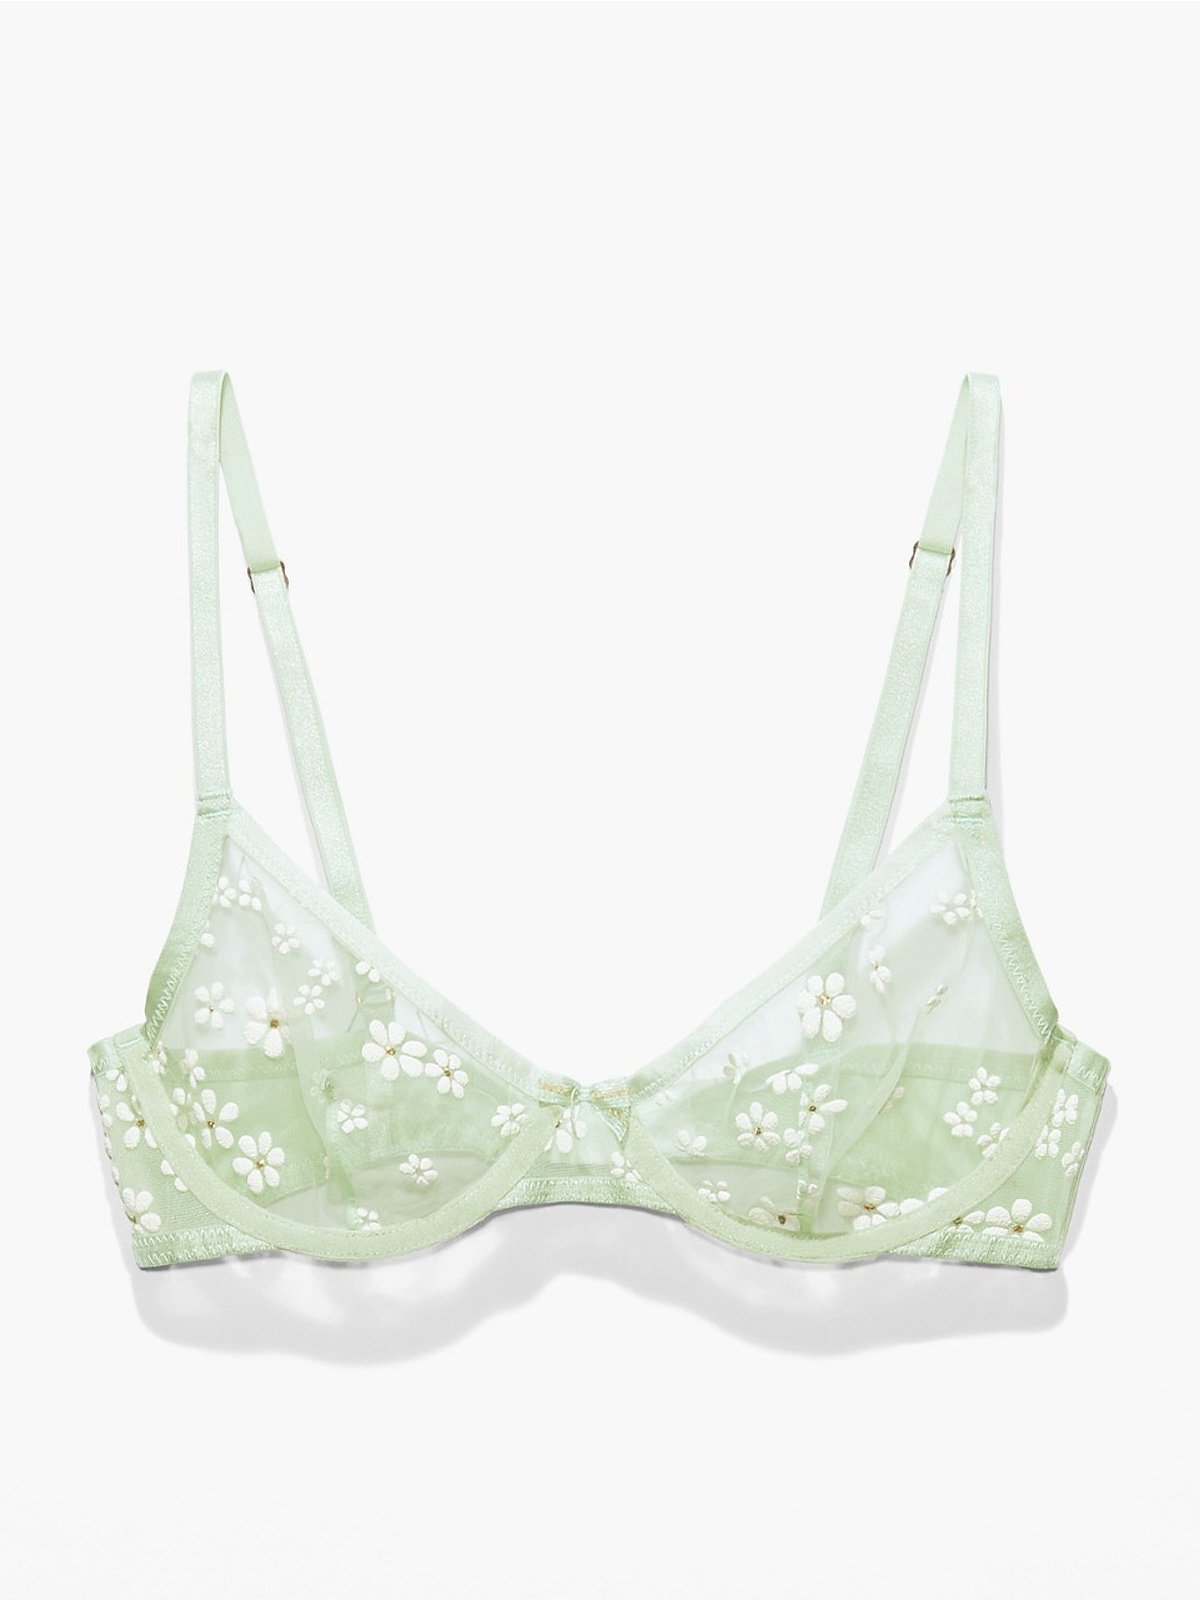 Savagexfenty Tagged by Savage Unlined Bra - “Kelly Green” color in 34B Green  Size 34 B - $35 (30% Off Retail) New With Tags - From Tina